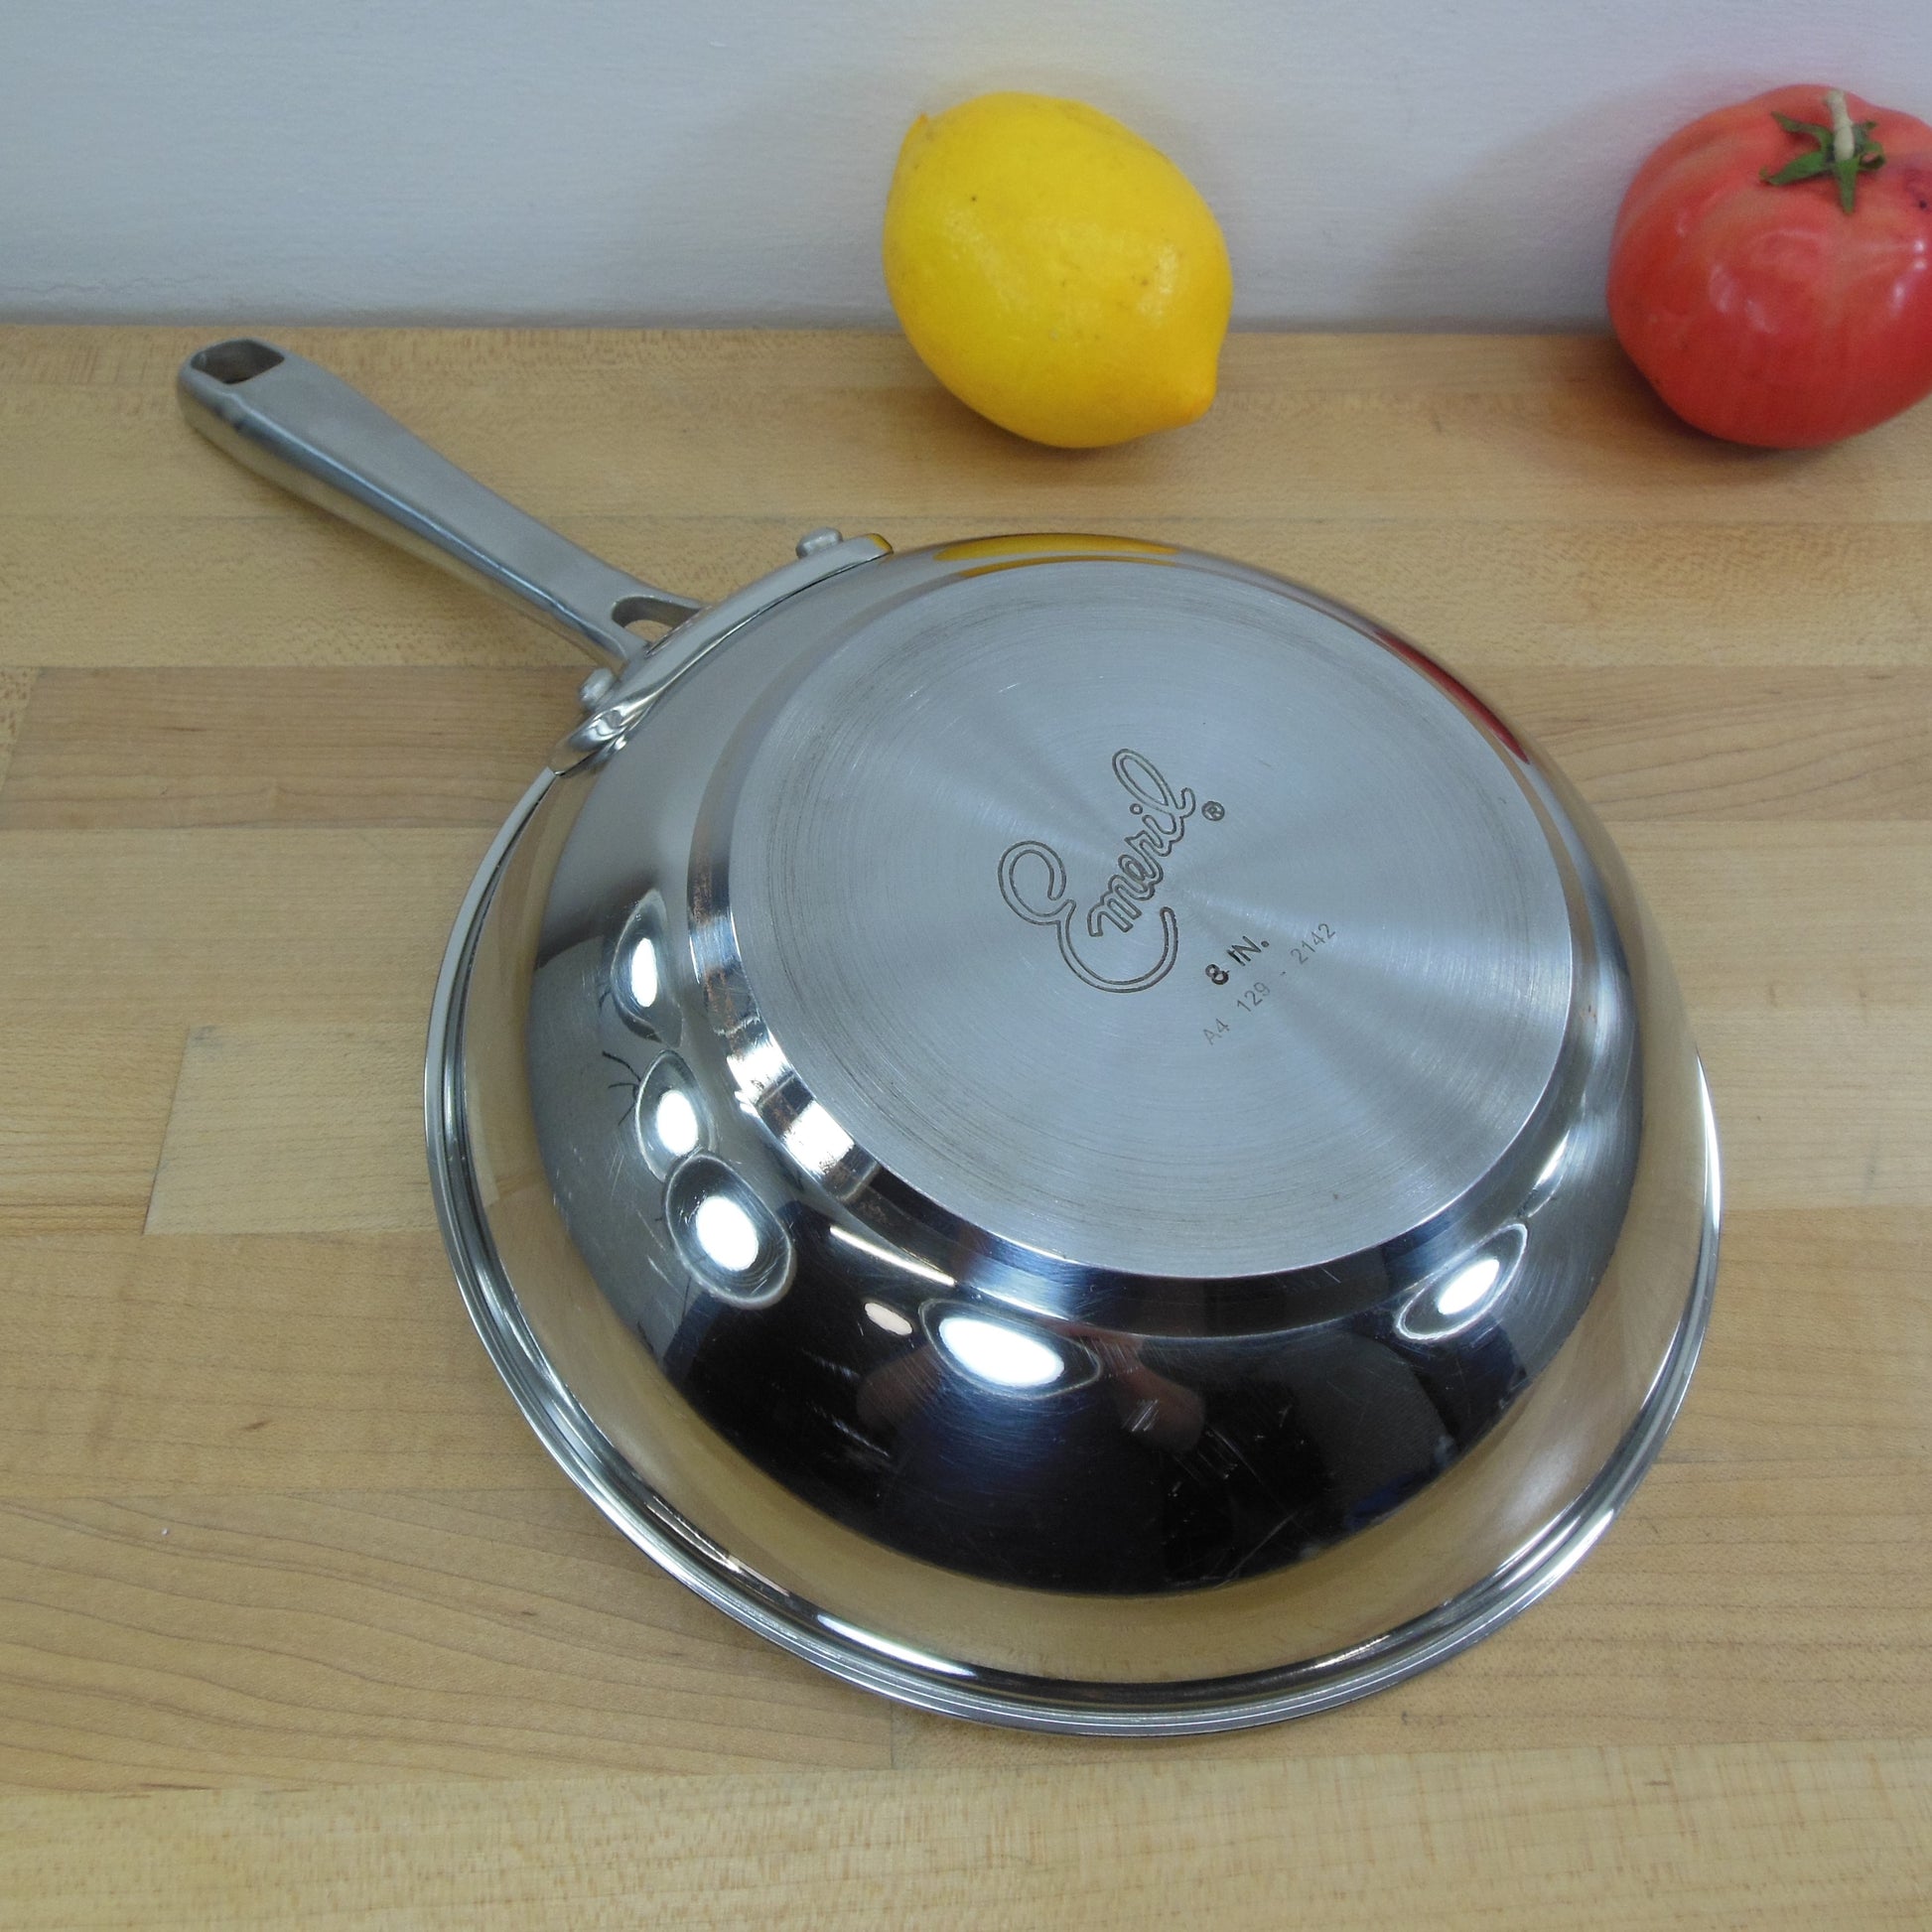 Emeril By All-Clad Stainless Copper Core 8" Sauté Pan Wok Skillet Used